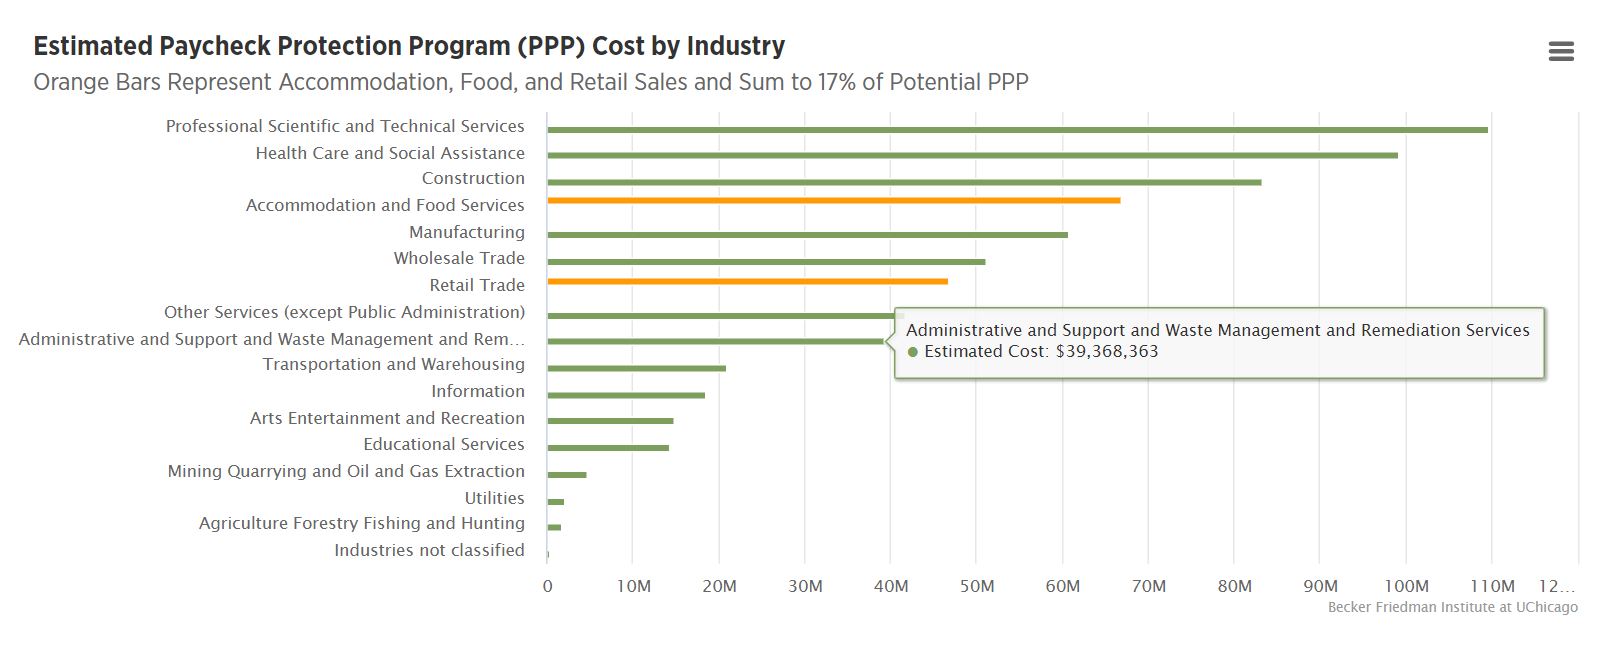 Estimated Paycheck Protection Program (PPP) Cost by Industry – Bar chart